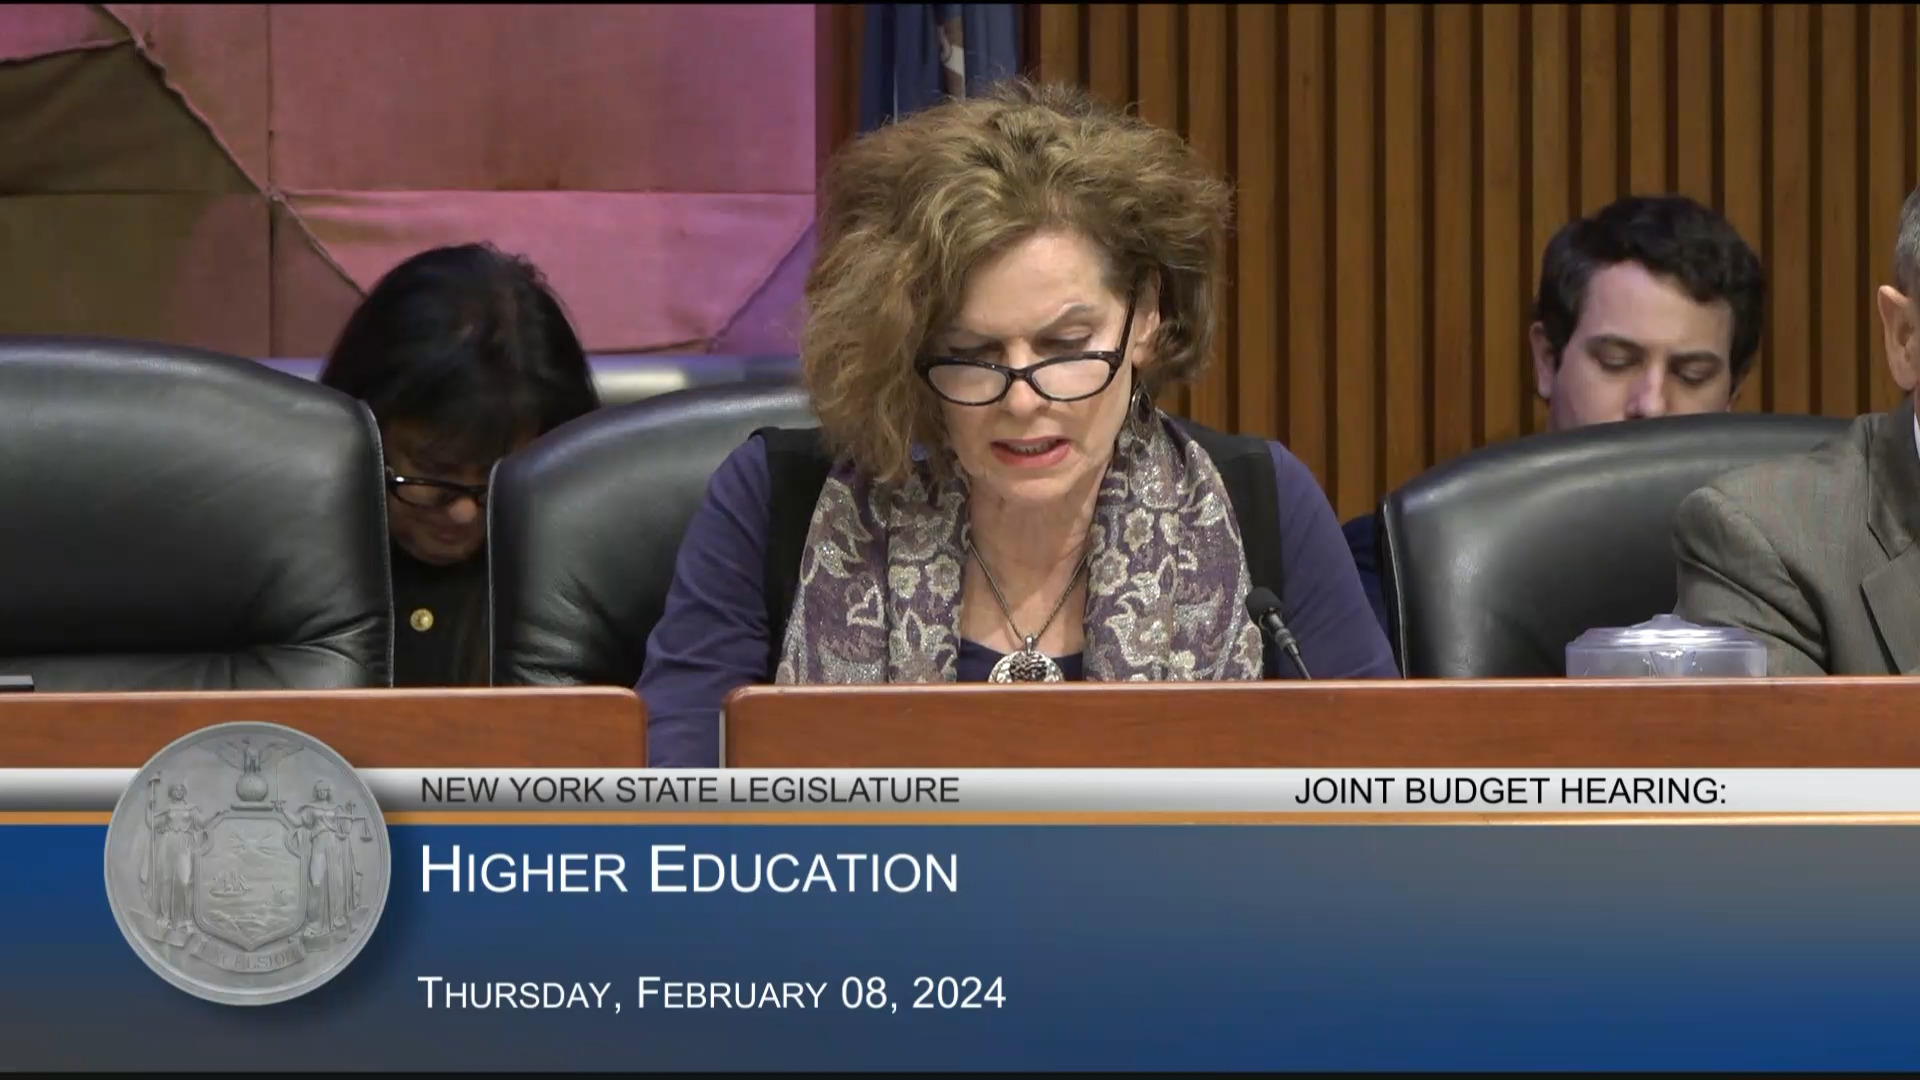 Union Officials Testify During Budget Hearing on Higher Education